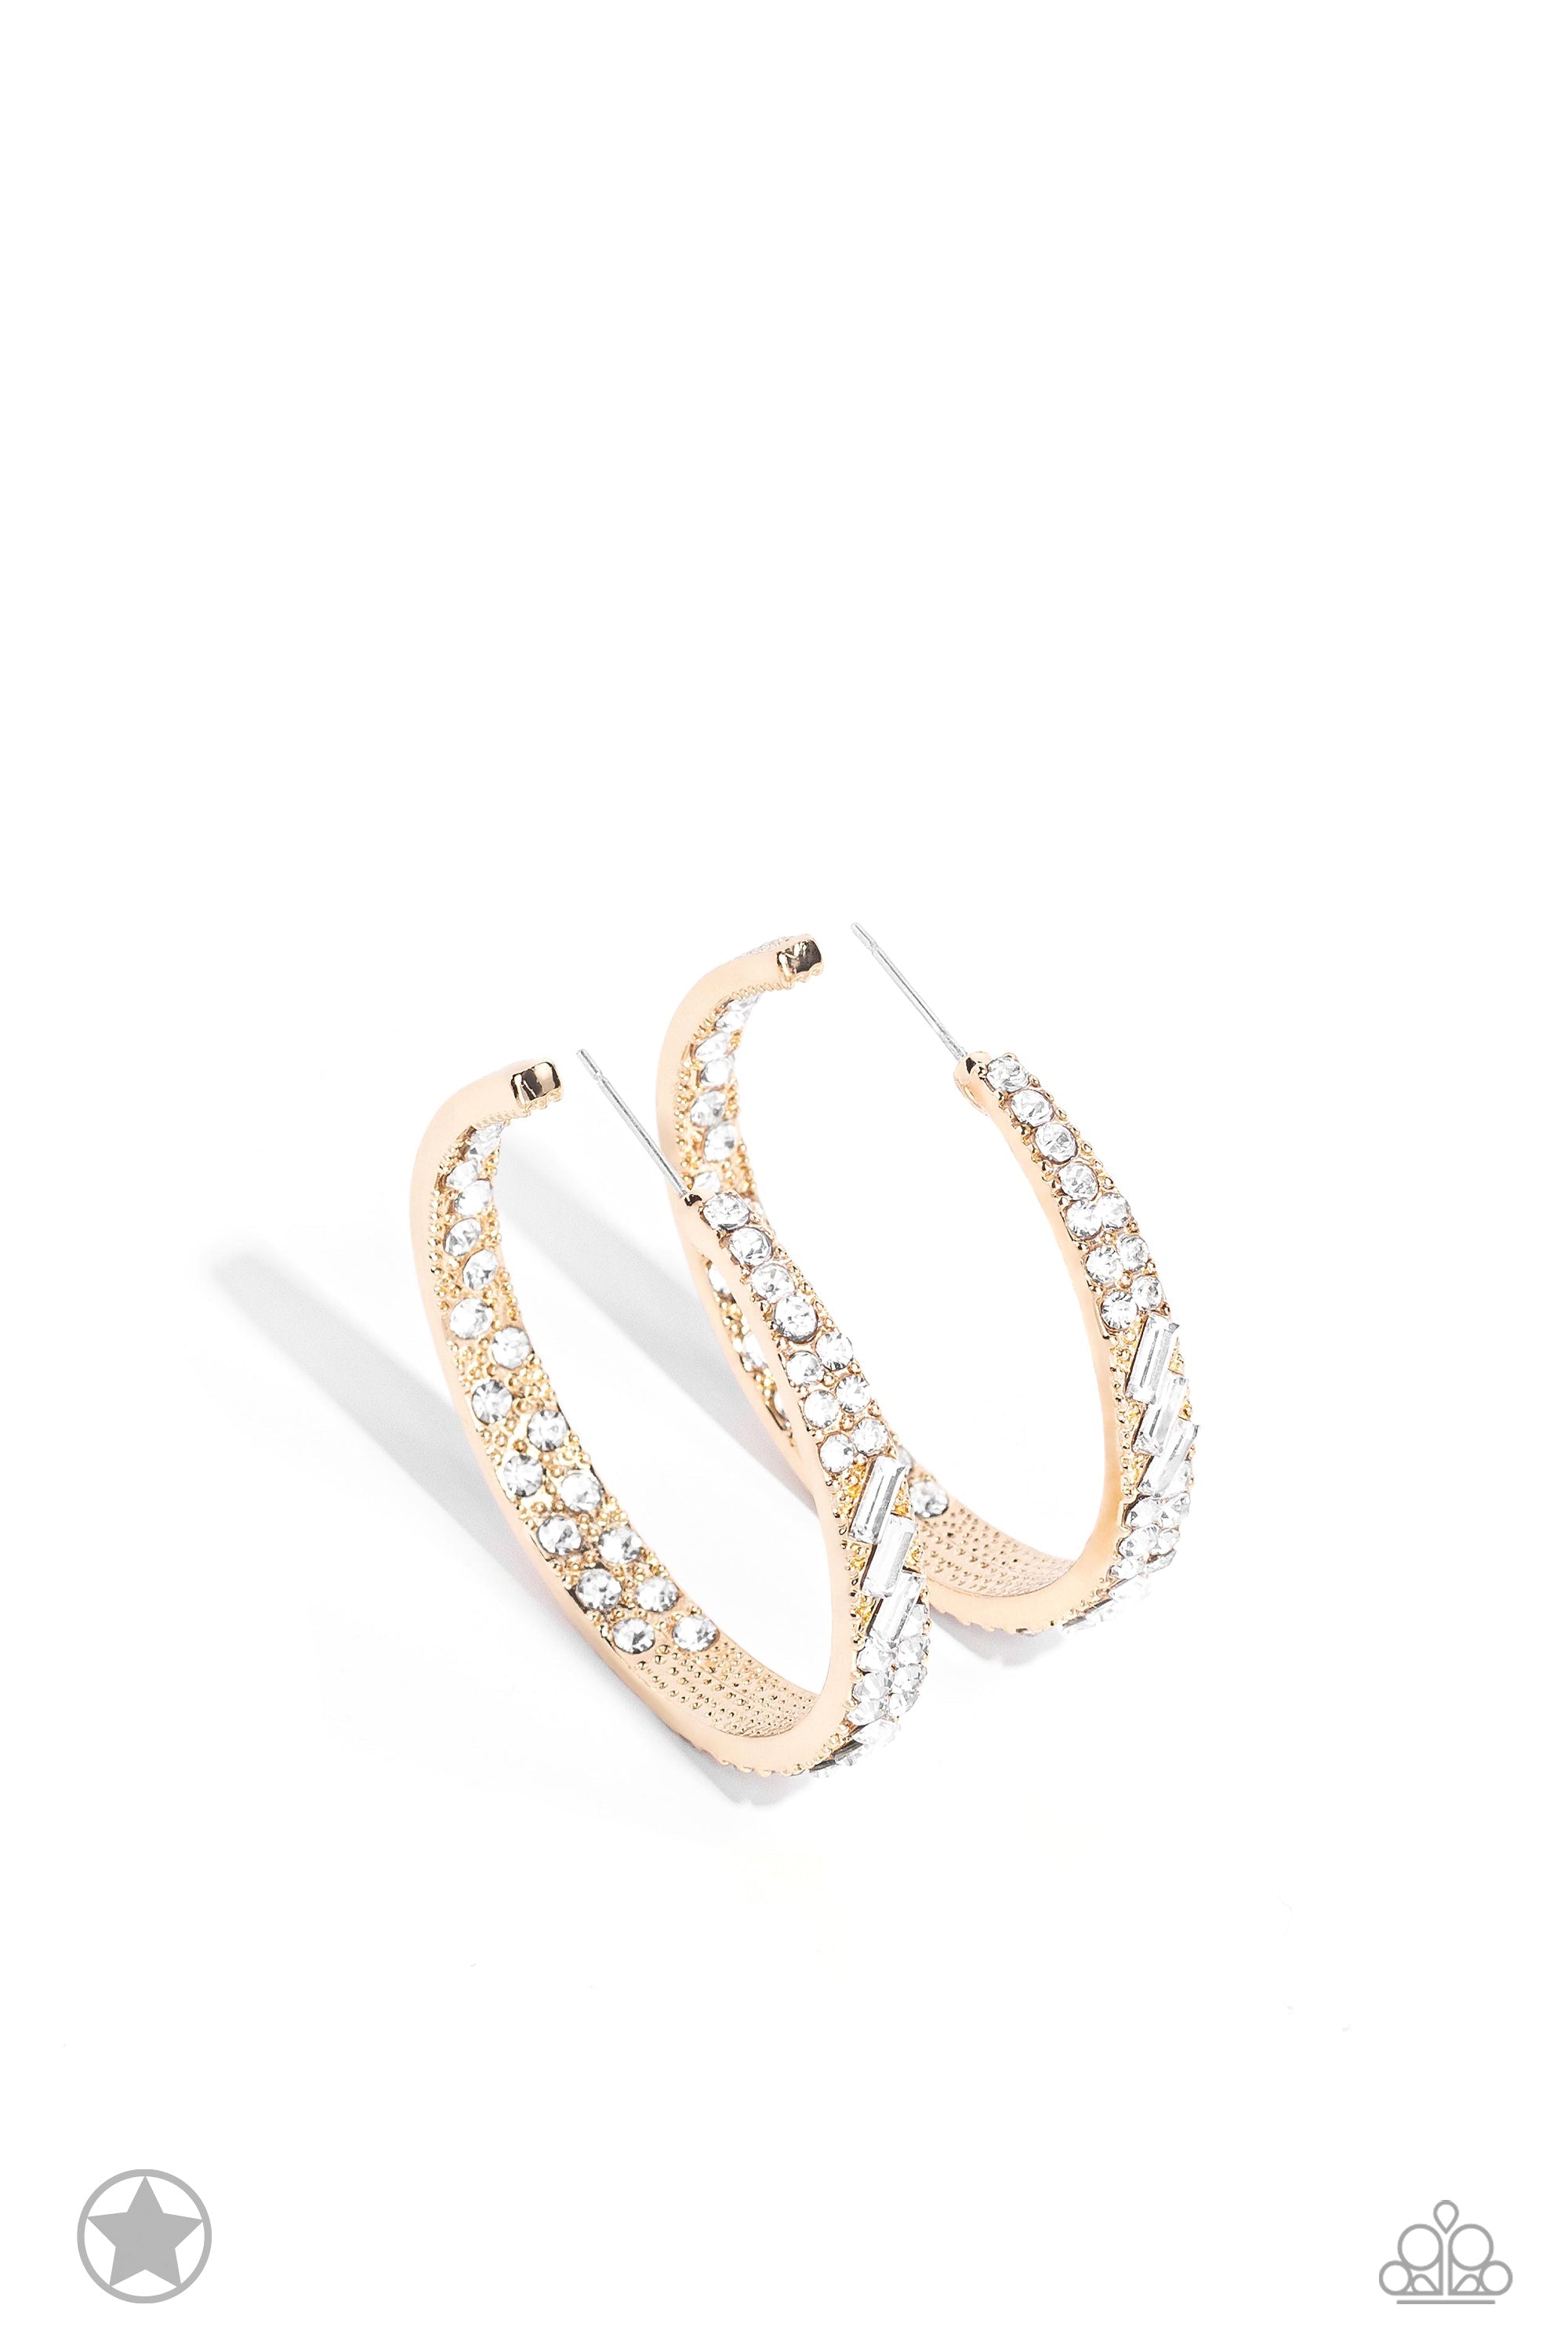 GLITZY By Association Gold & White Rhinestone Hoop Earrings - Paparazzi Accessories- lightbox - CarasShop.com - $5 Jewelry by Cara Jewels